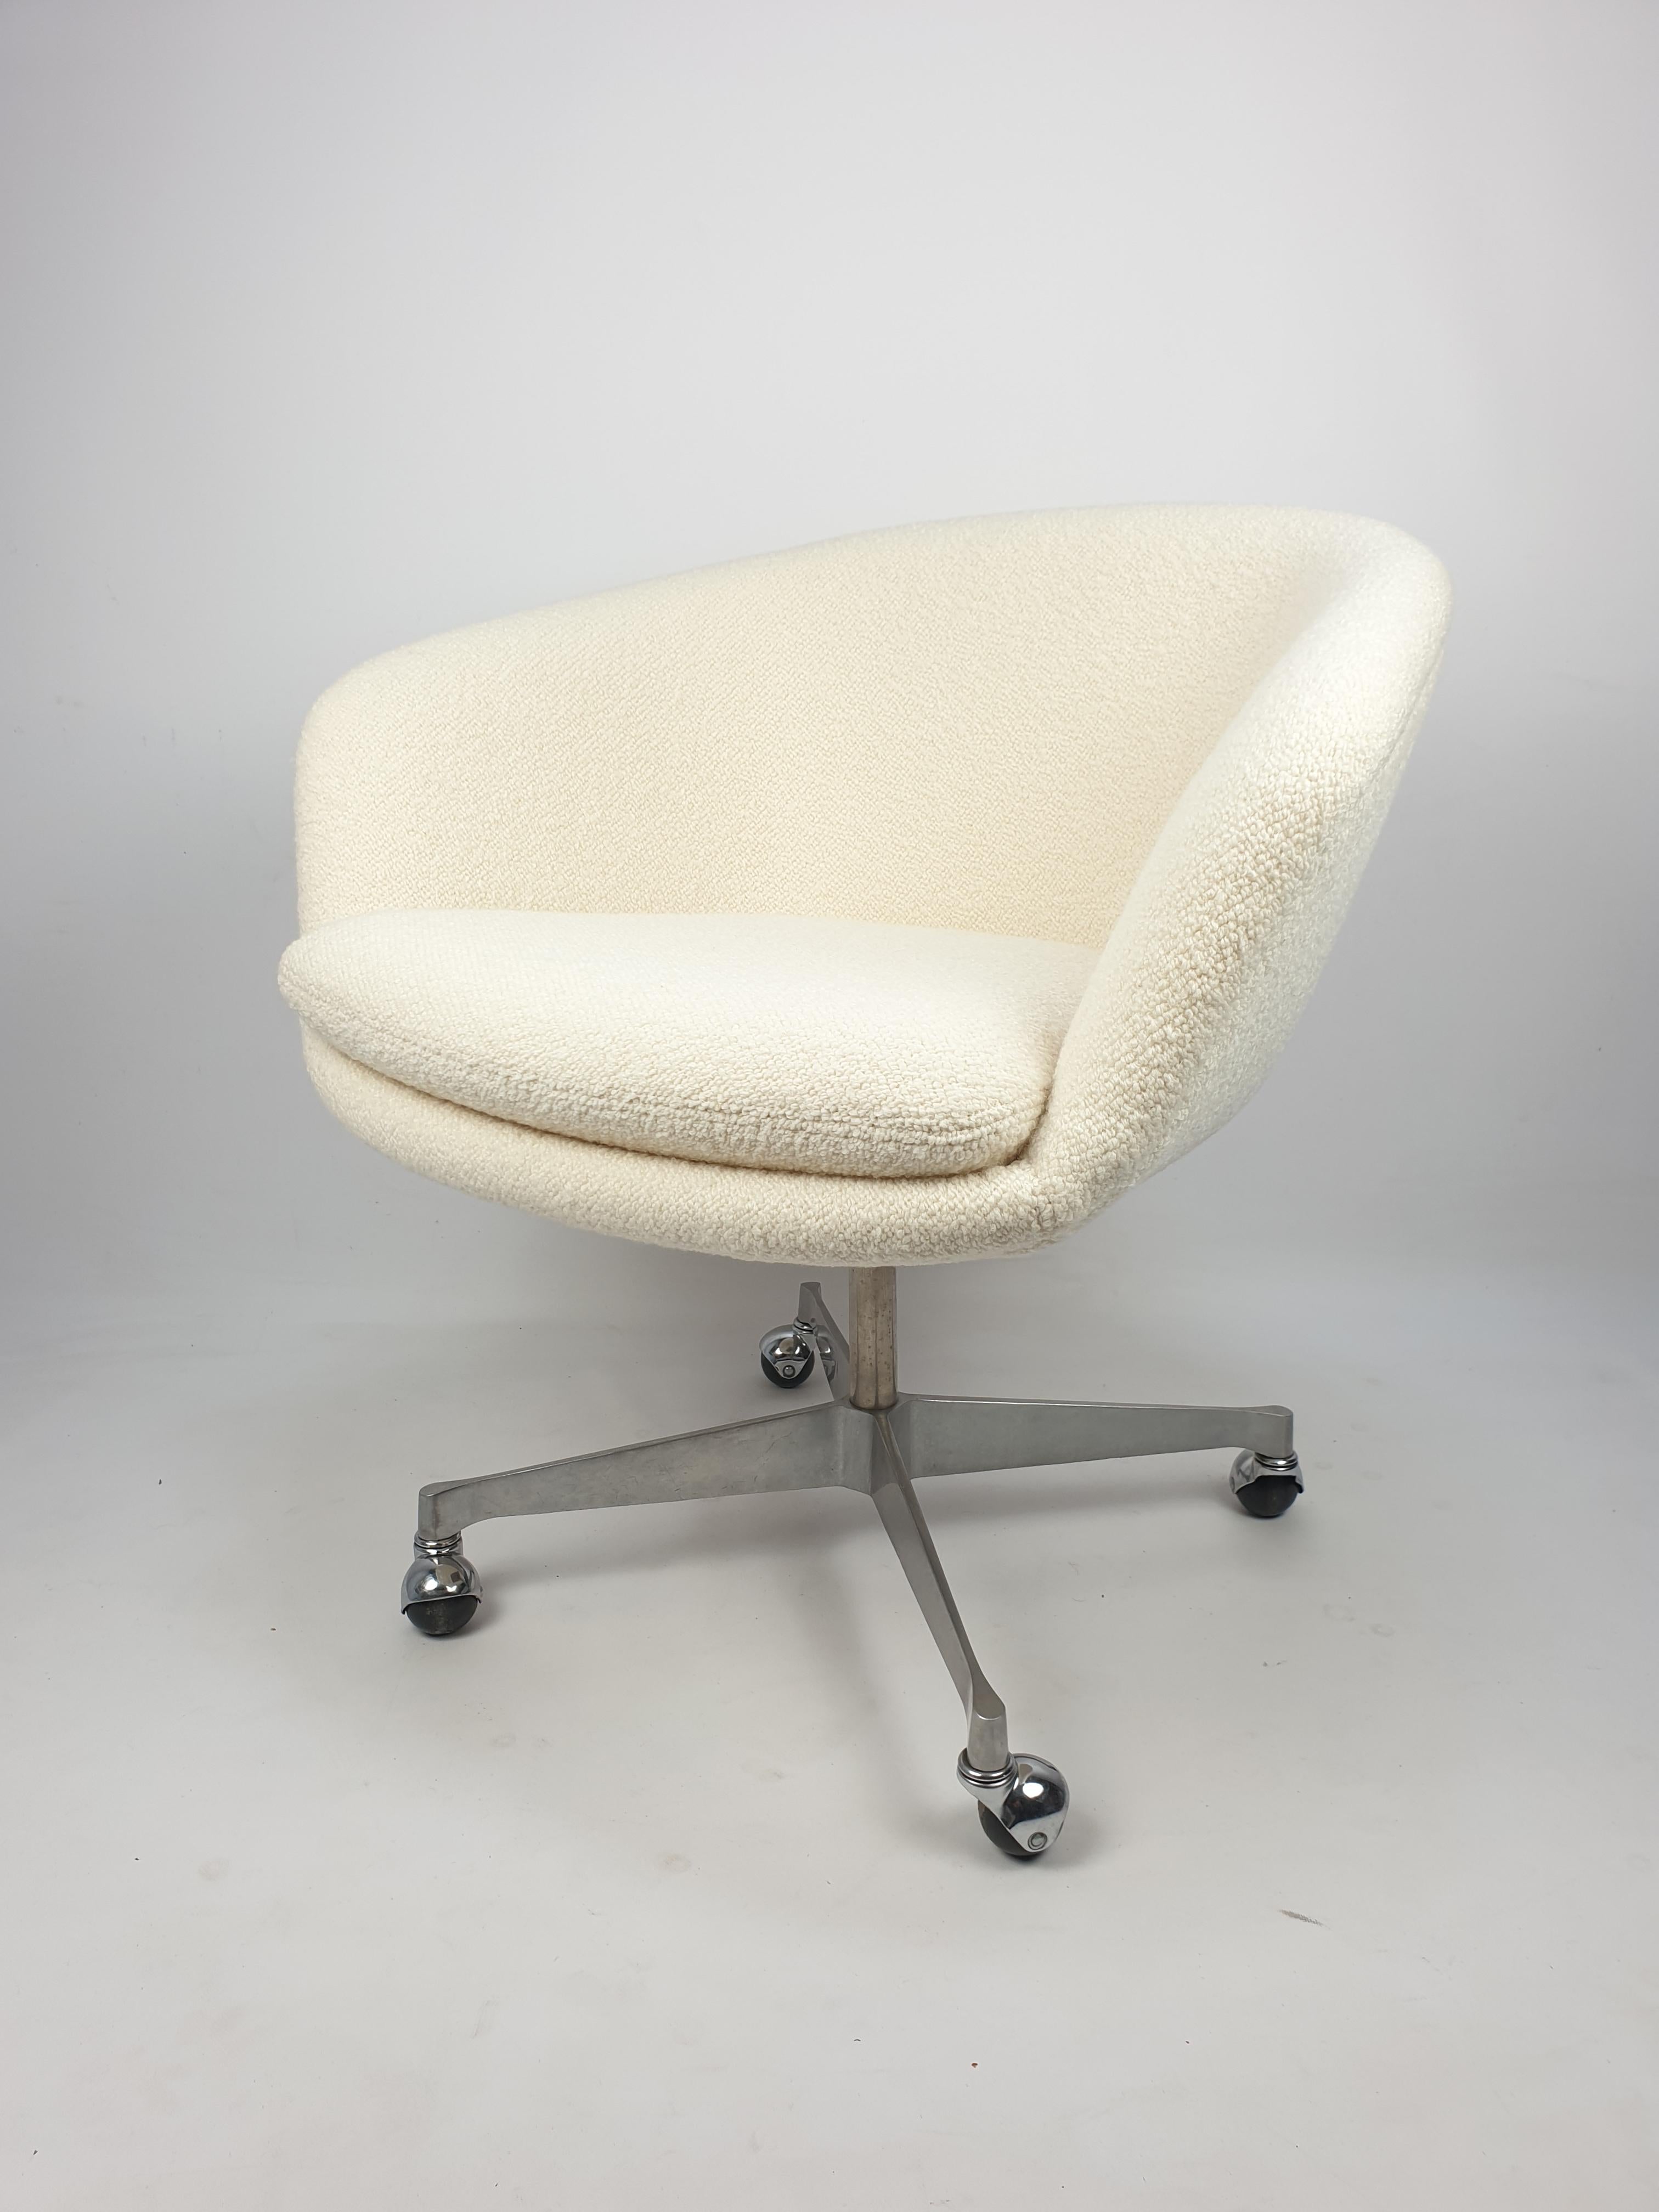 Very cute and extremely rare desk- or armchair, designed by Pierre Paulin and manufactured by Artifort in the 60's. The nicely shaped seat with the soft cushion makes the chair very comfortable. It has been restored with new fabric and new foam, so